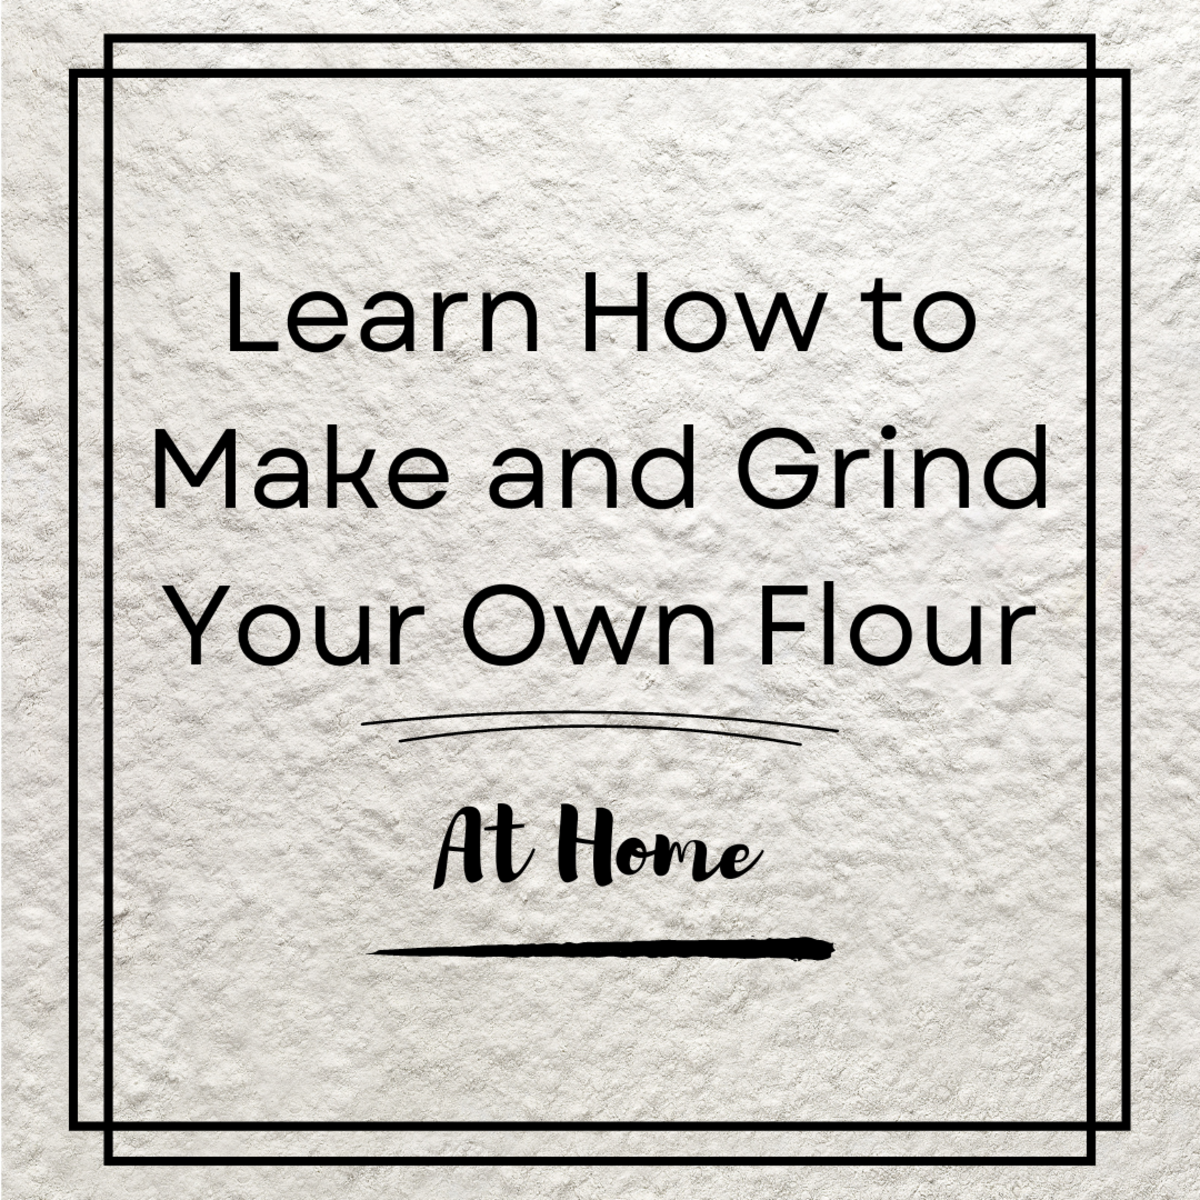 Interested in grinding your own flour? Read on to learn how. 